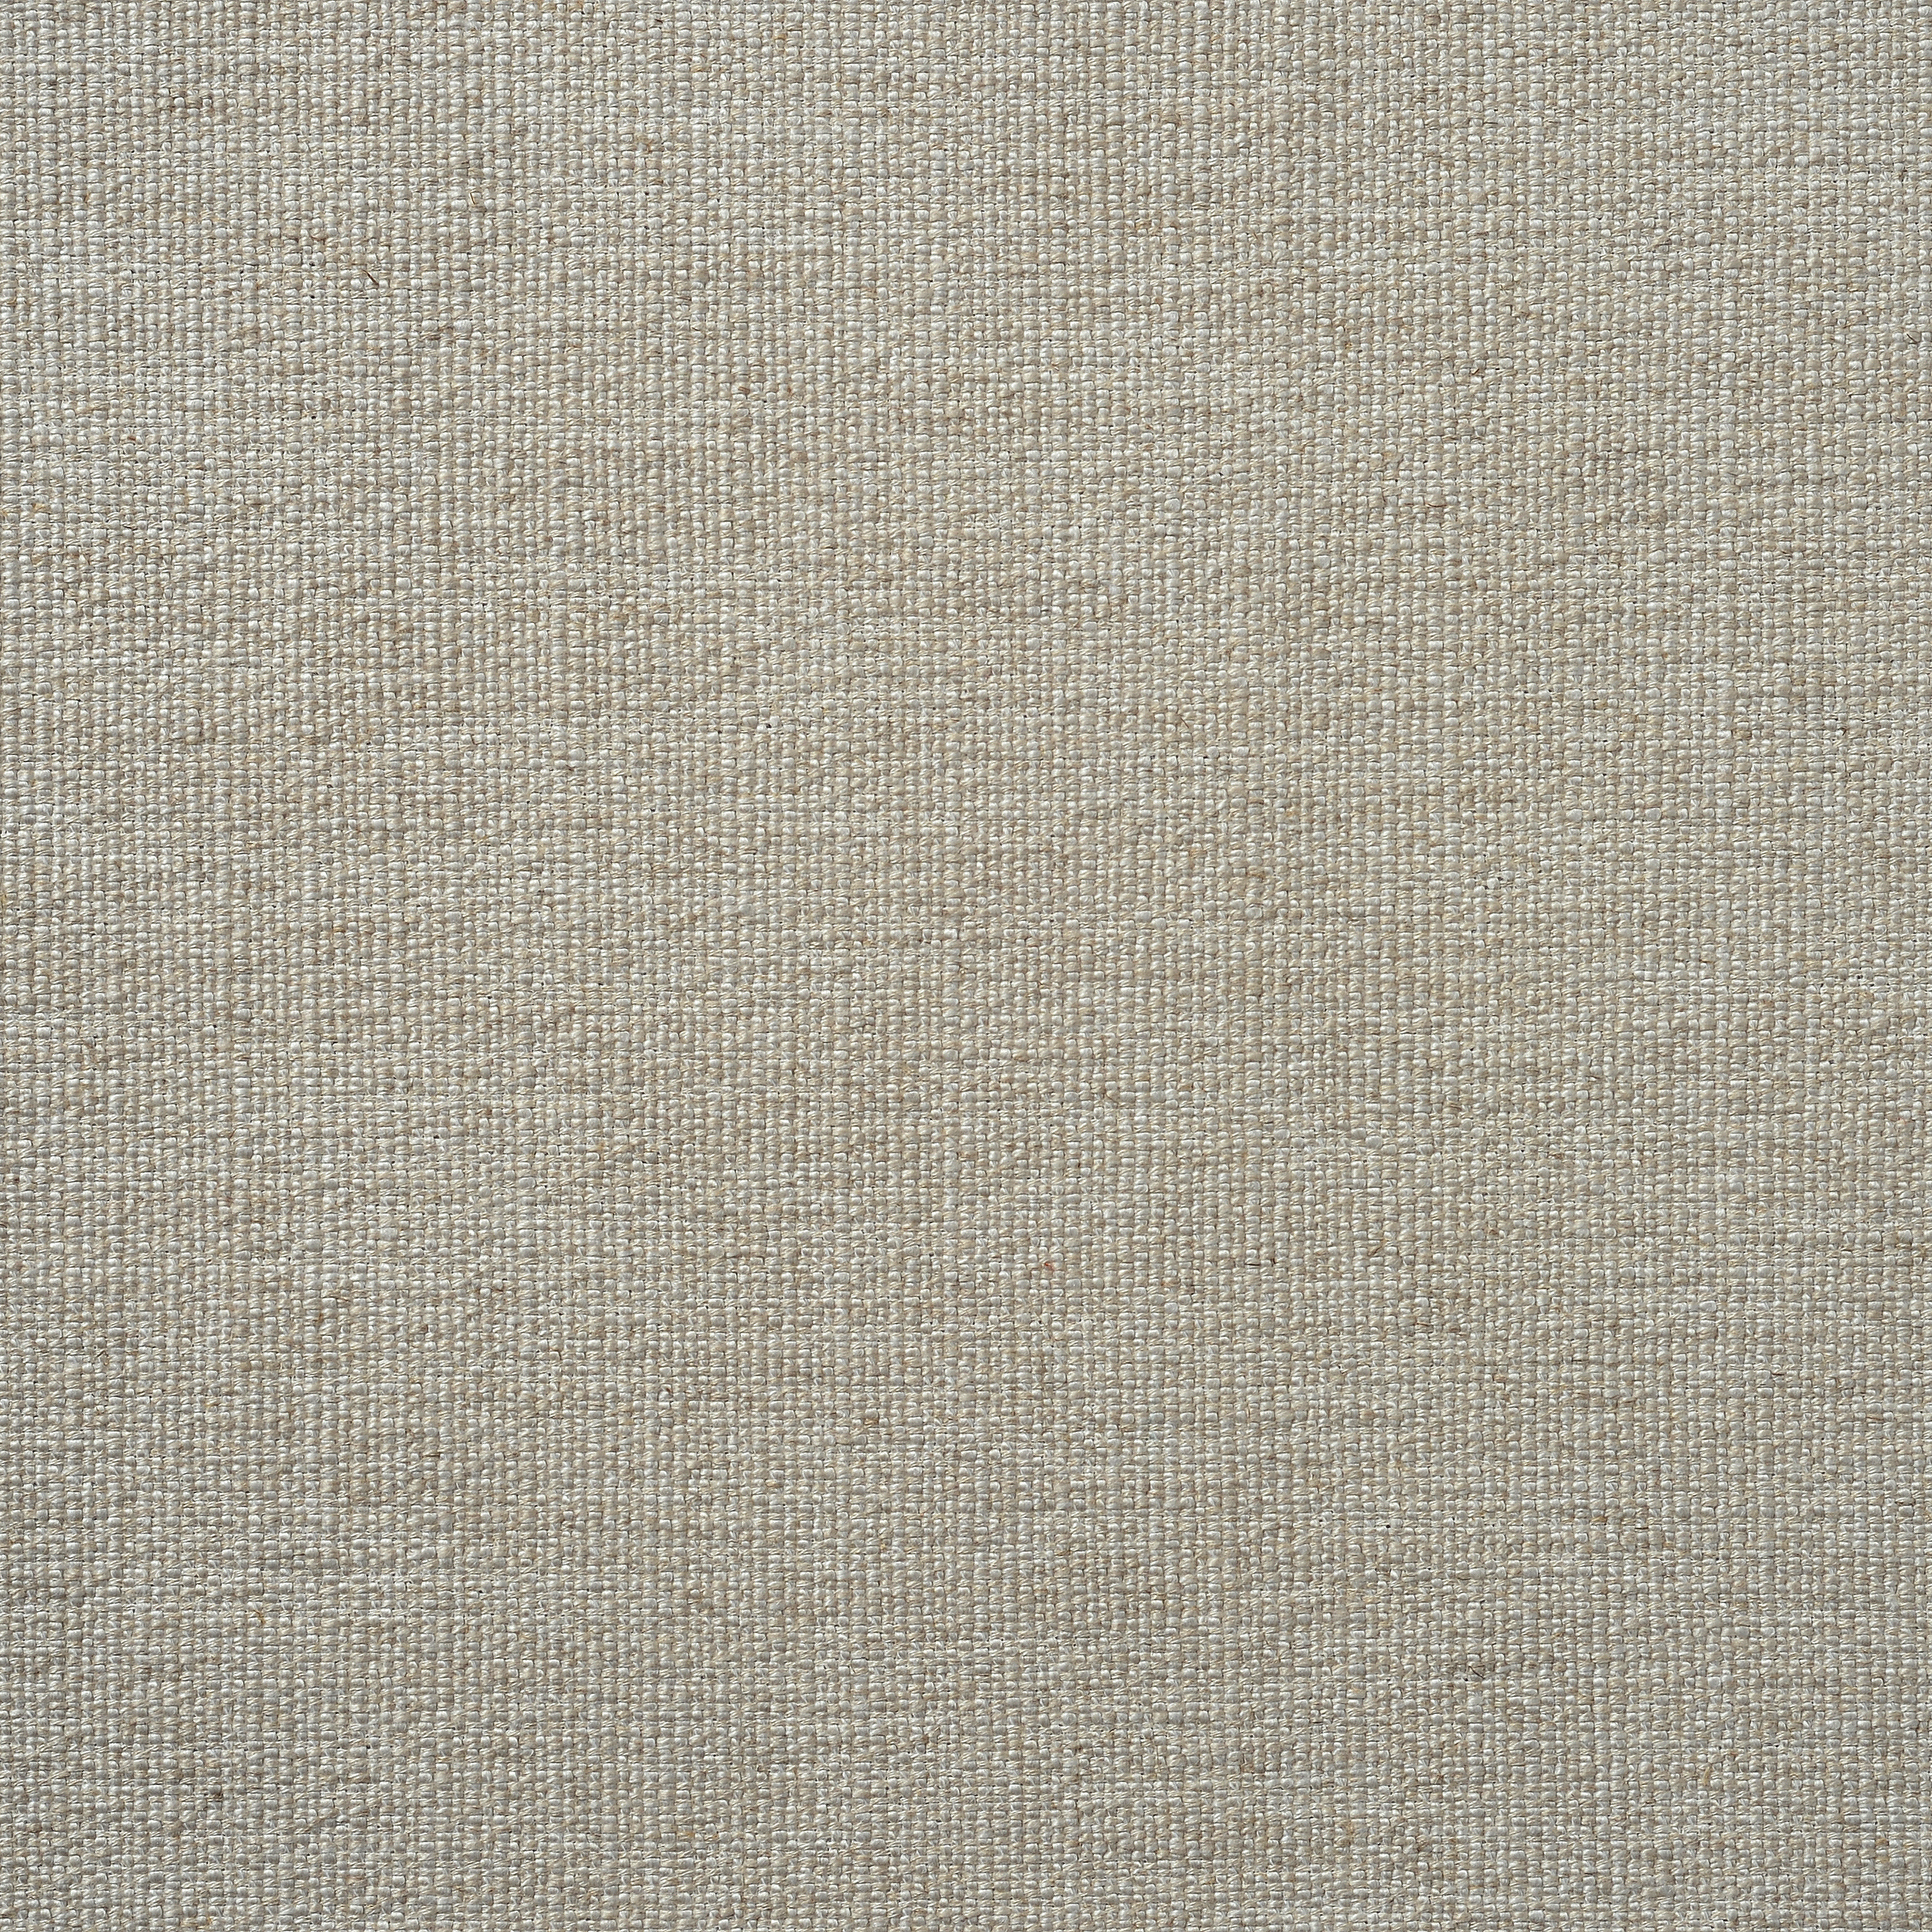 Isabel Small Rustic Weave - Natural